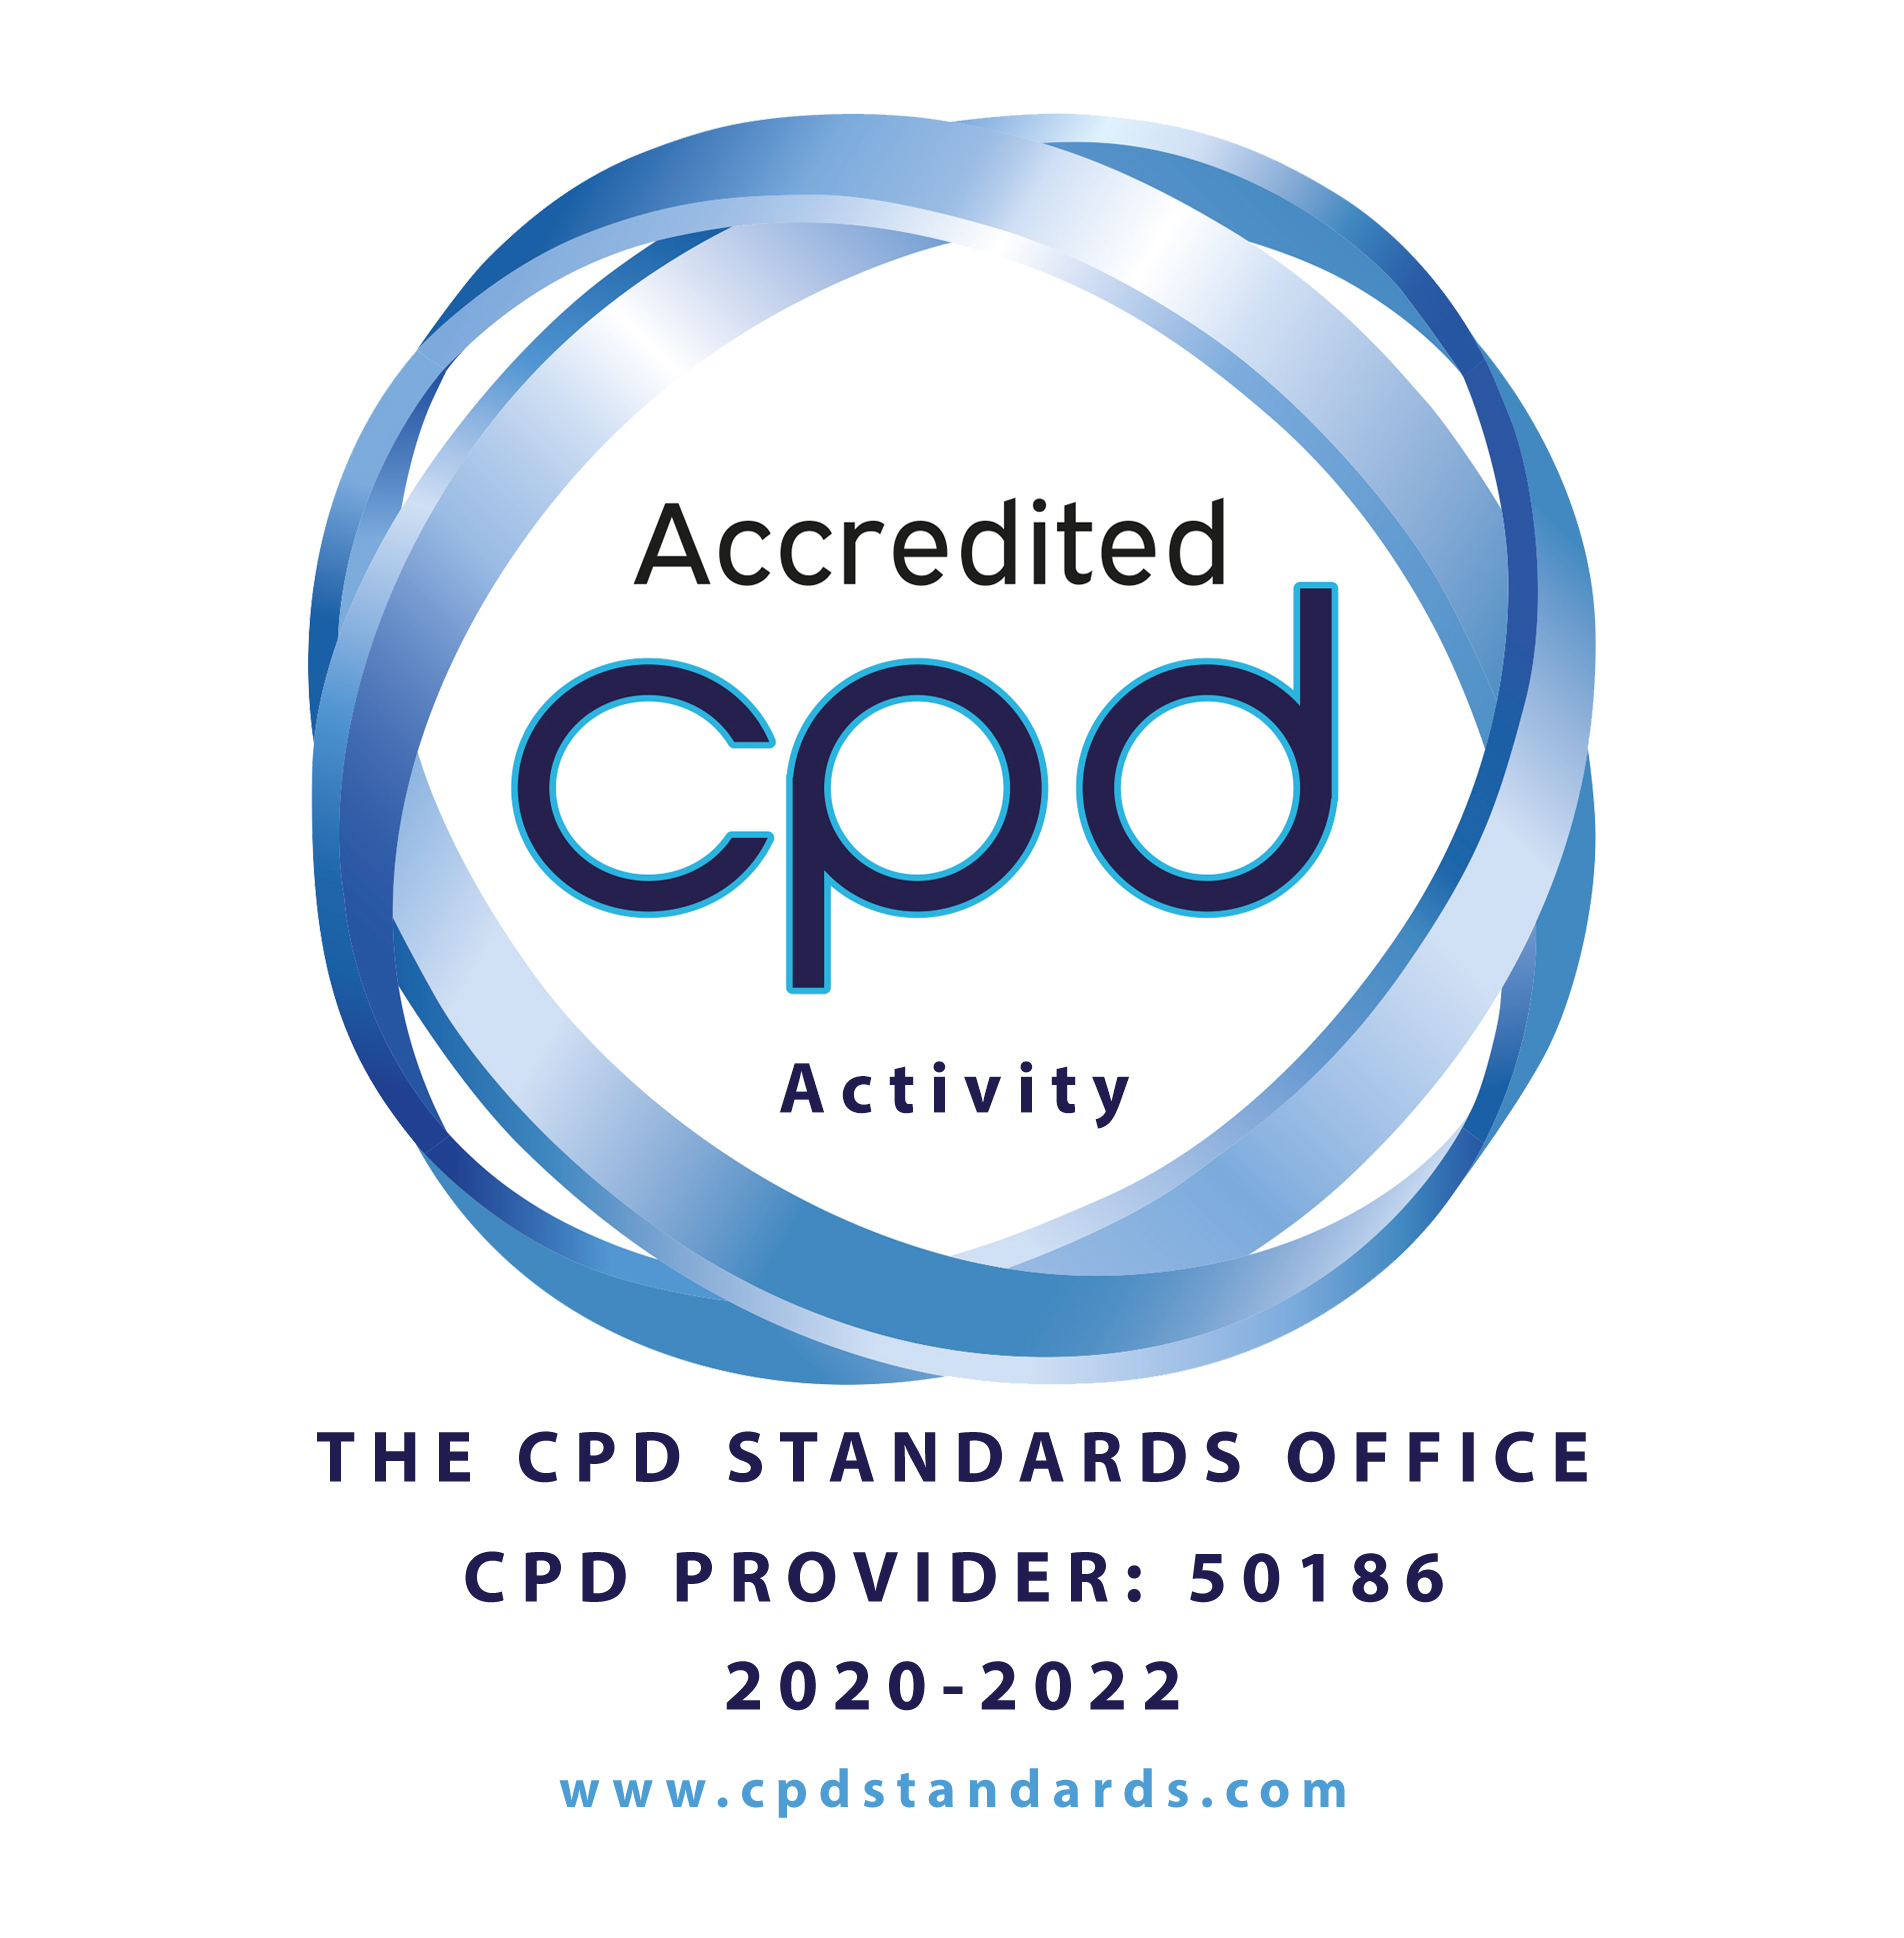 CPD accredited Be a leader programme